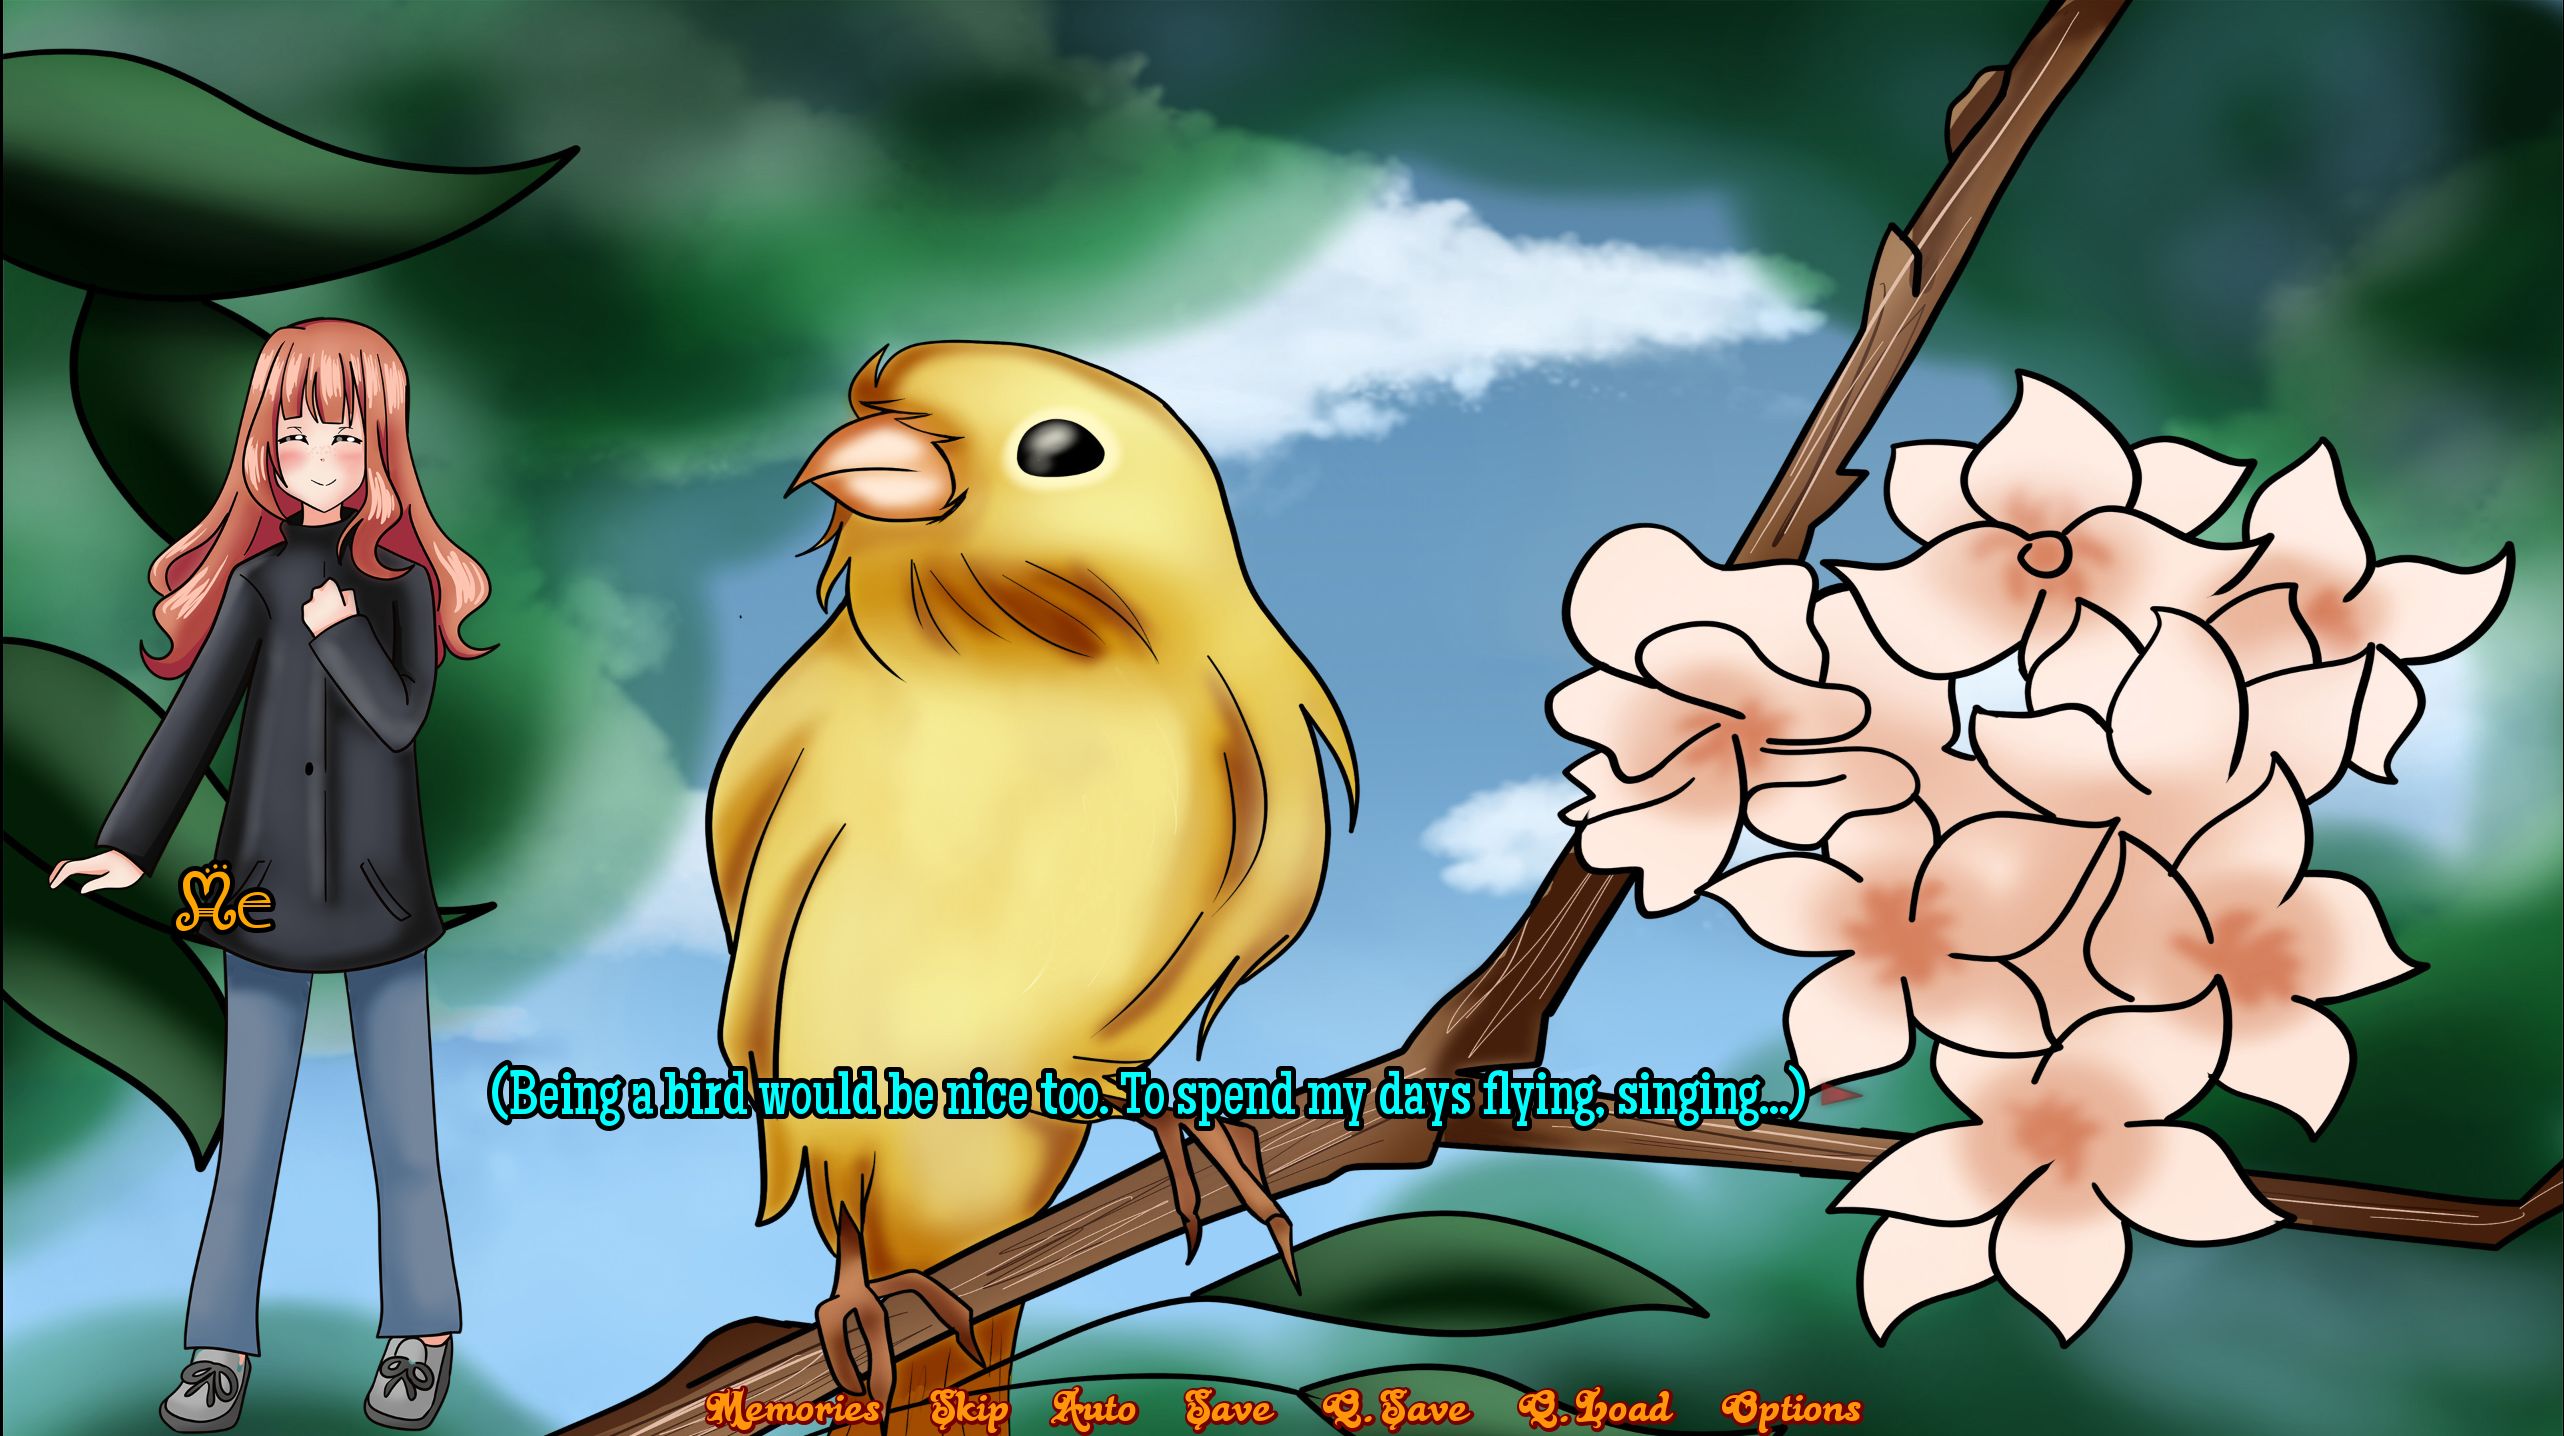 A screenshot of 4 Alice Magical Autistic Girls showing a close up of a yellow song bird in a tree, as the protagonist imagines it would be nice to be a bird